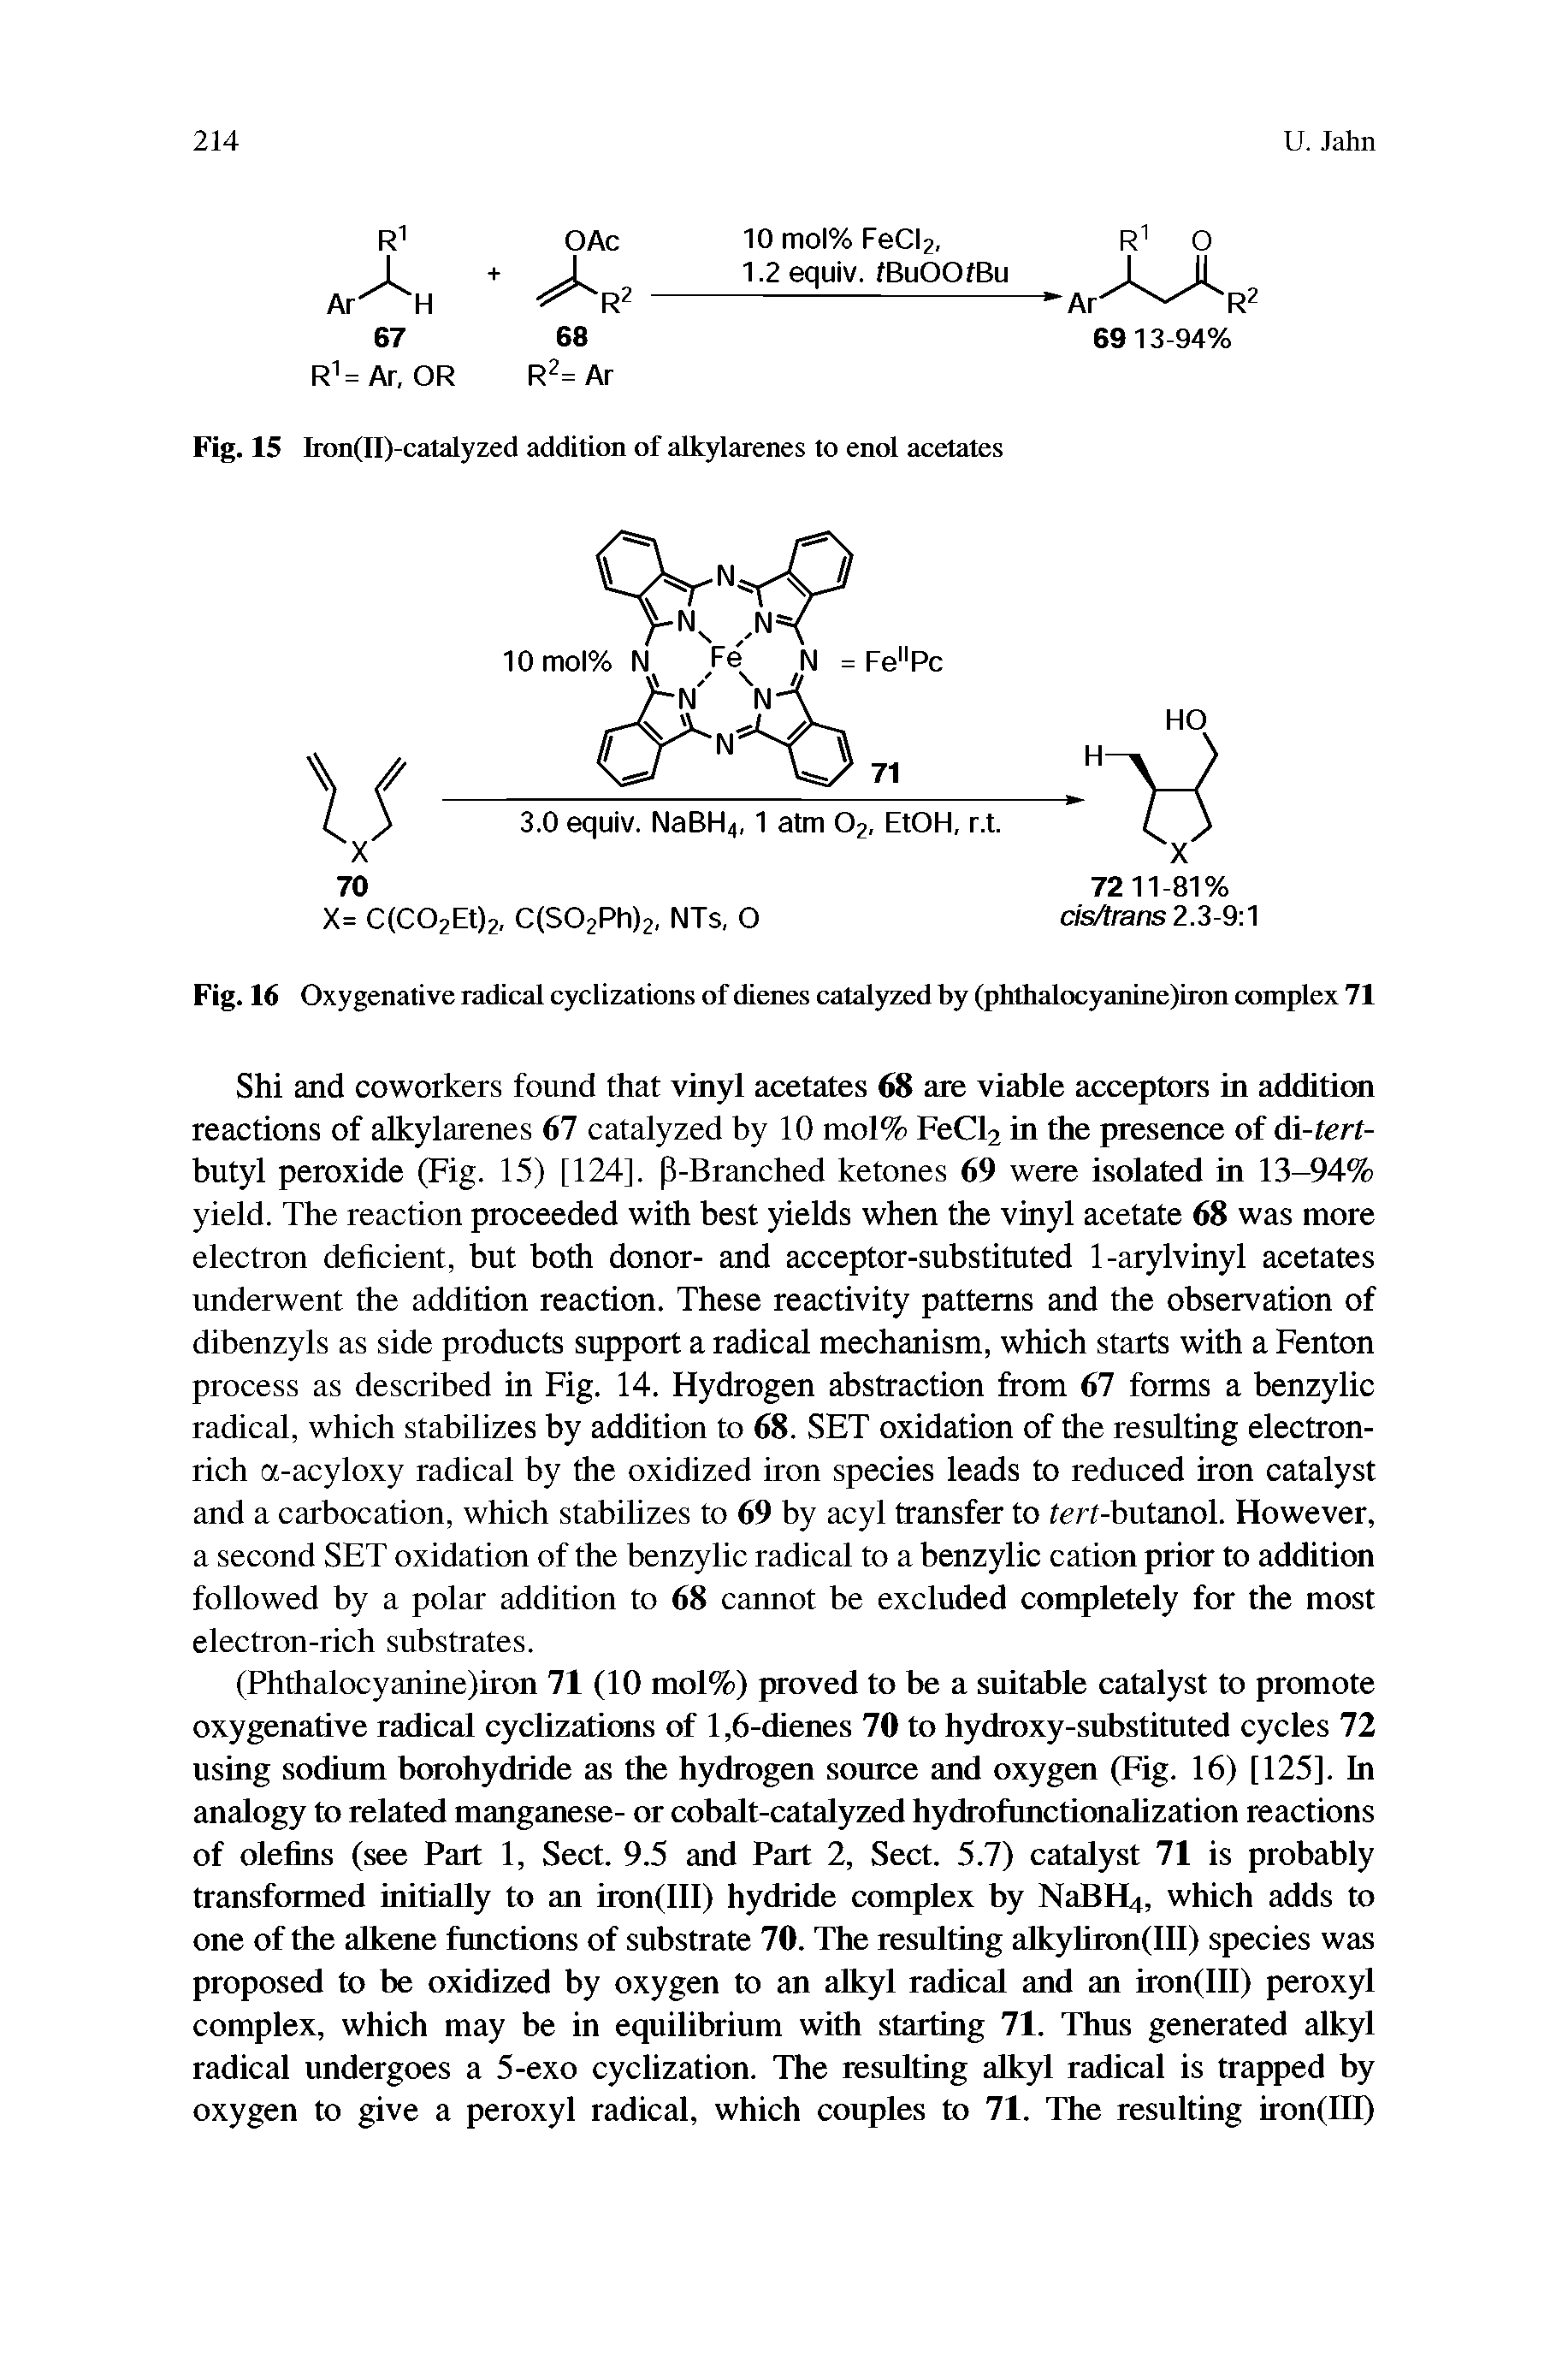 Fig. 16 Oxygenative radical cyclizations of dienes catalyzed by (phthalocyanine)iron complex 71...